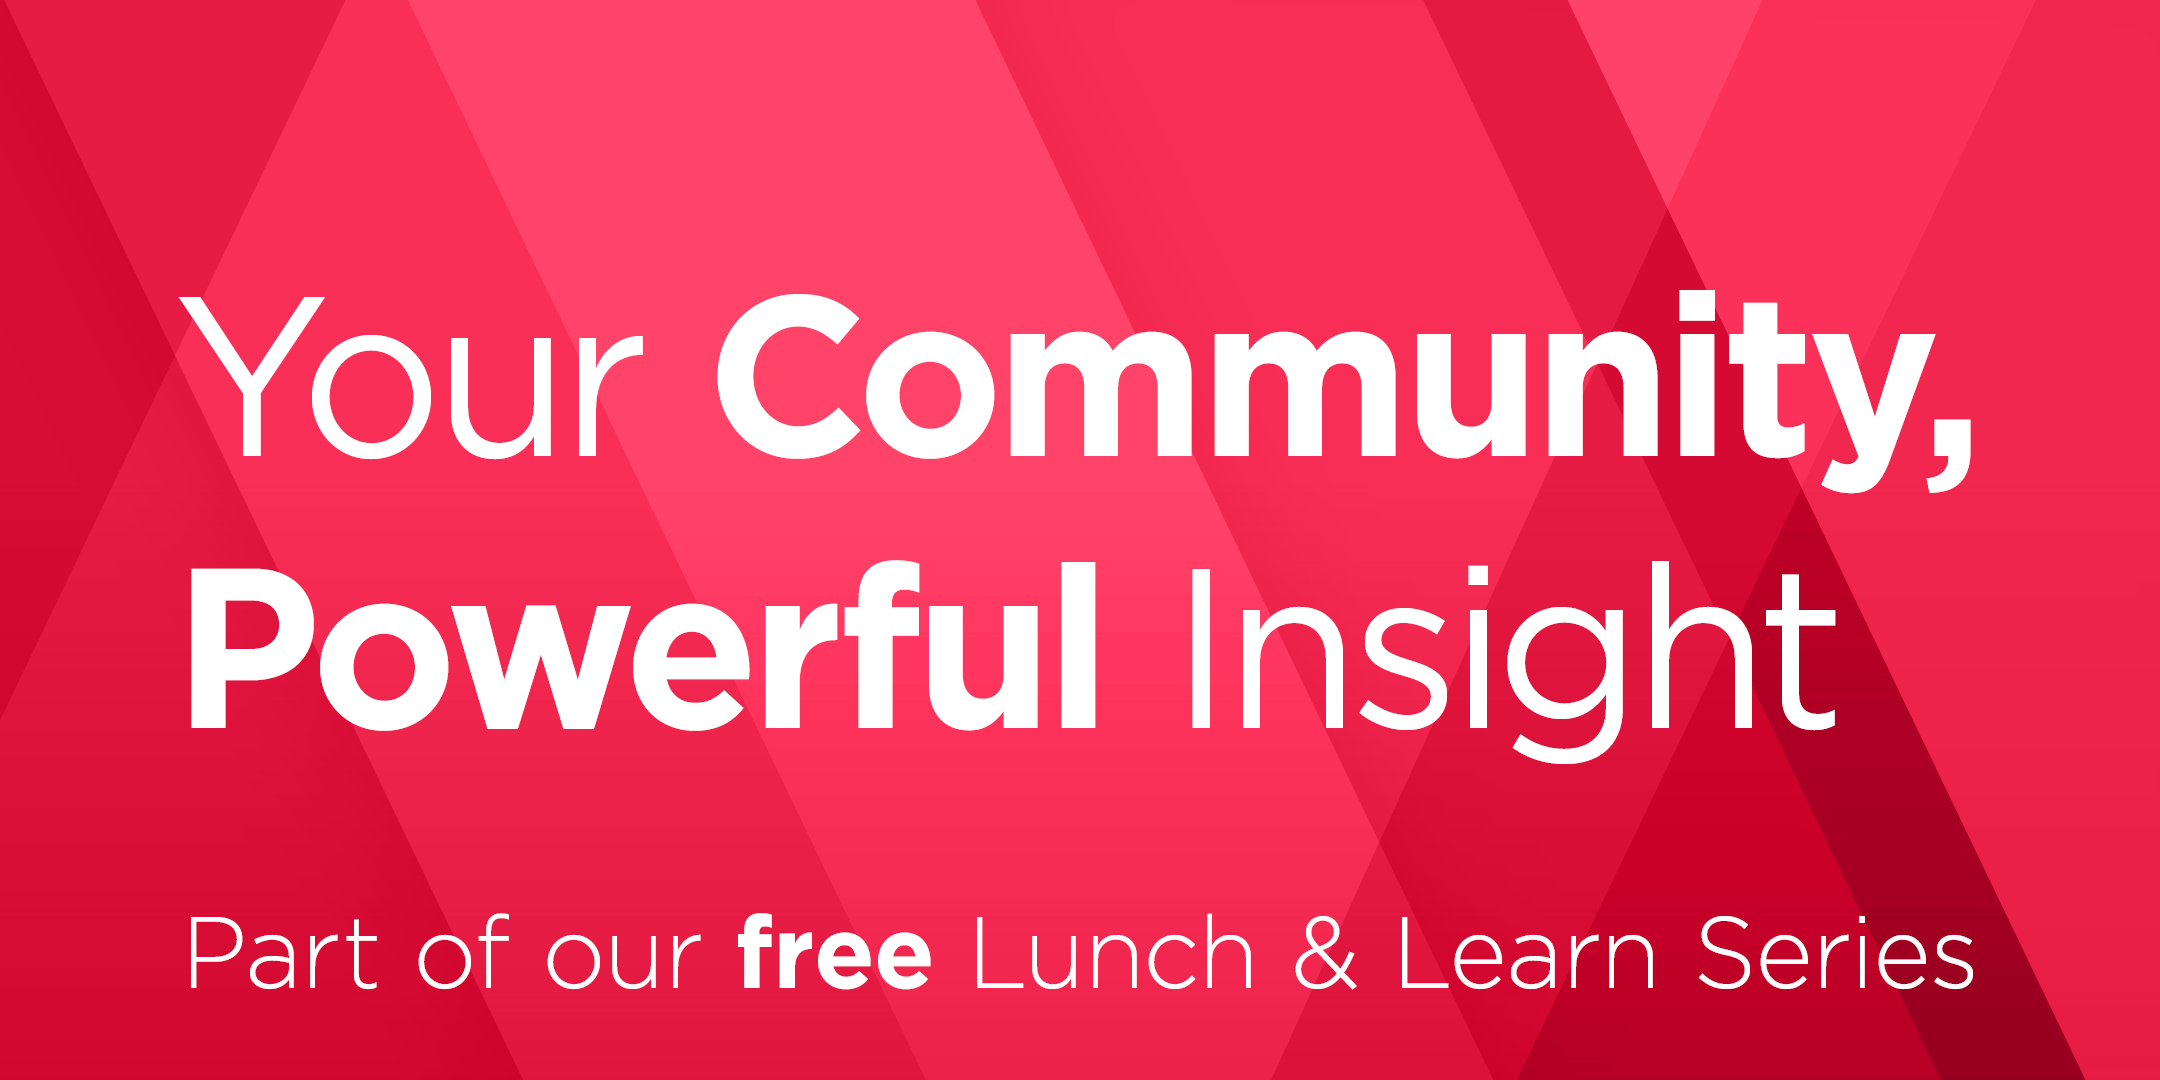 Lunch & Learn - Your Community, Powerful Insight